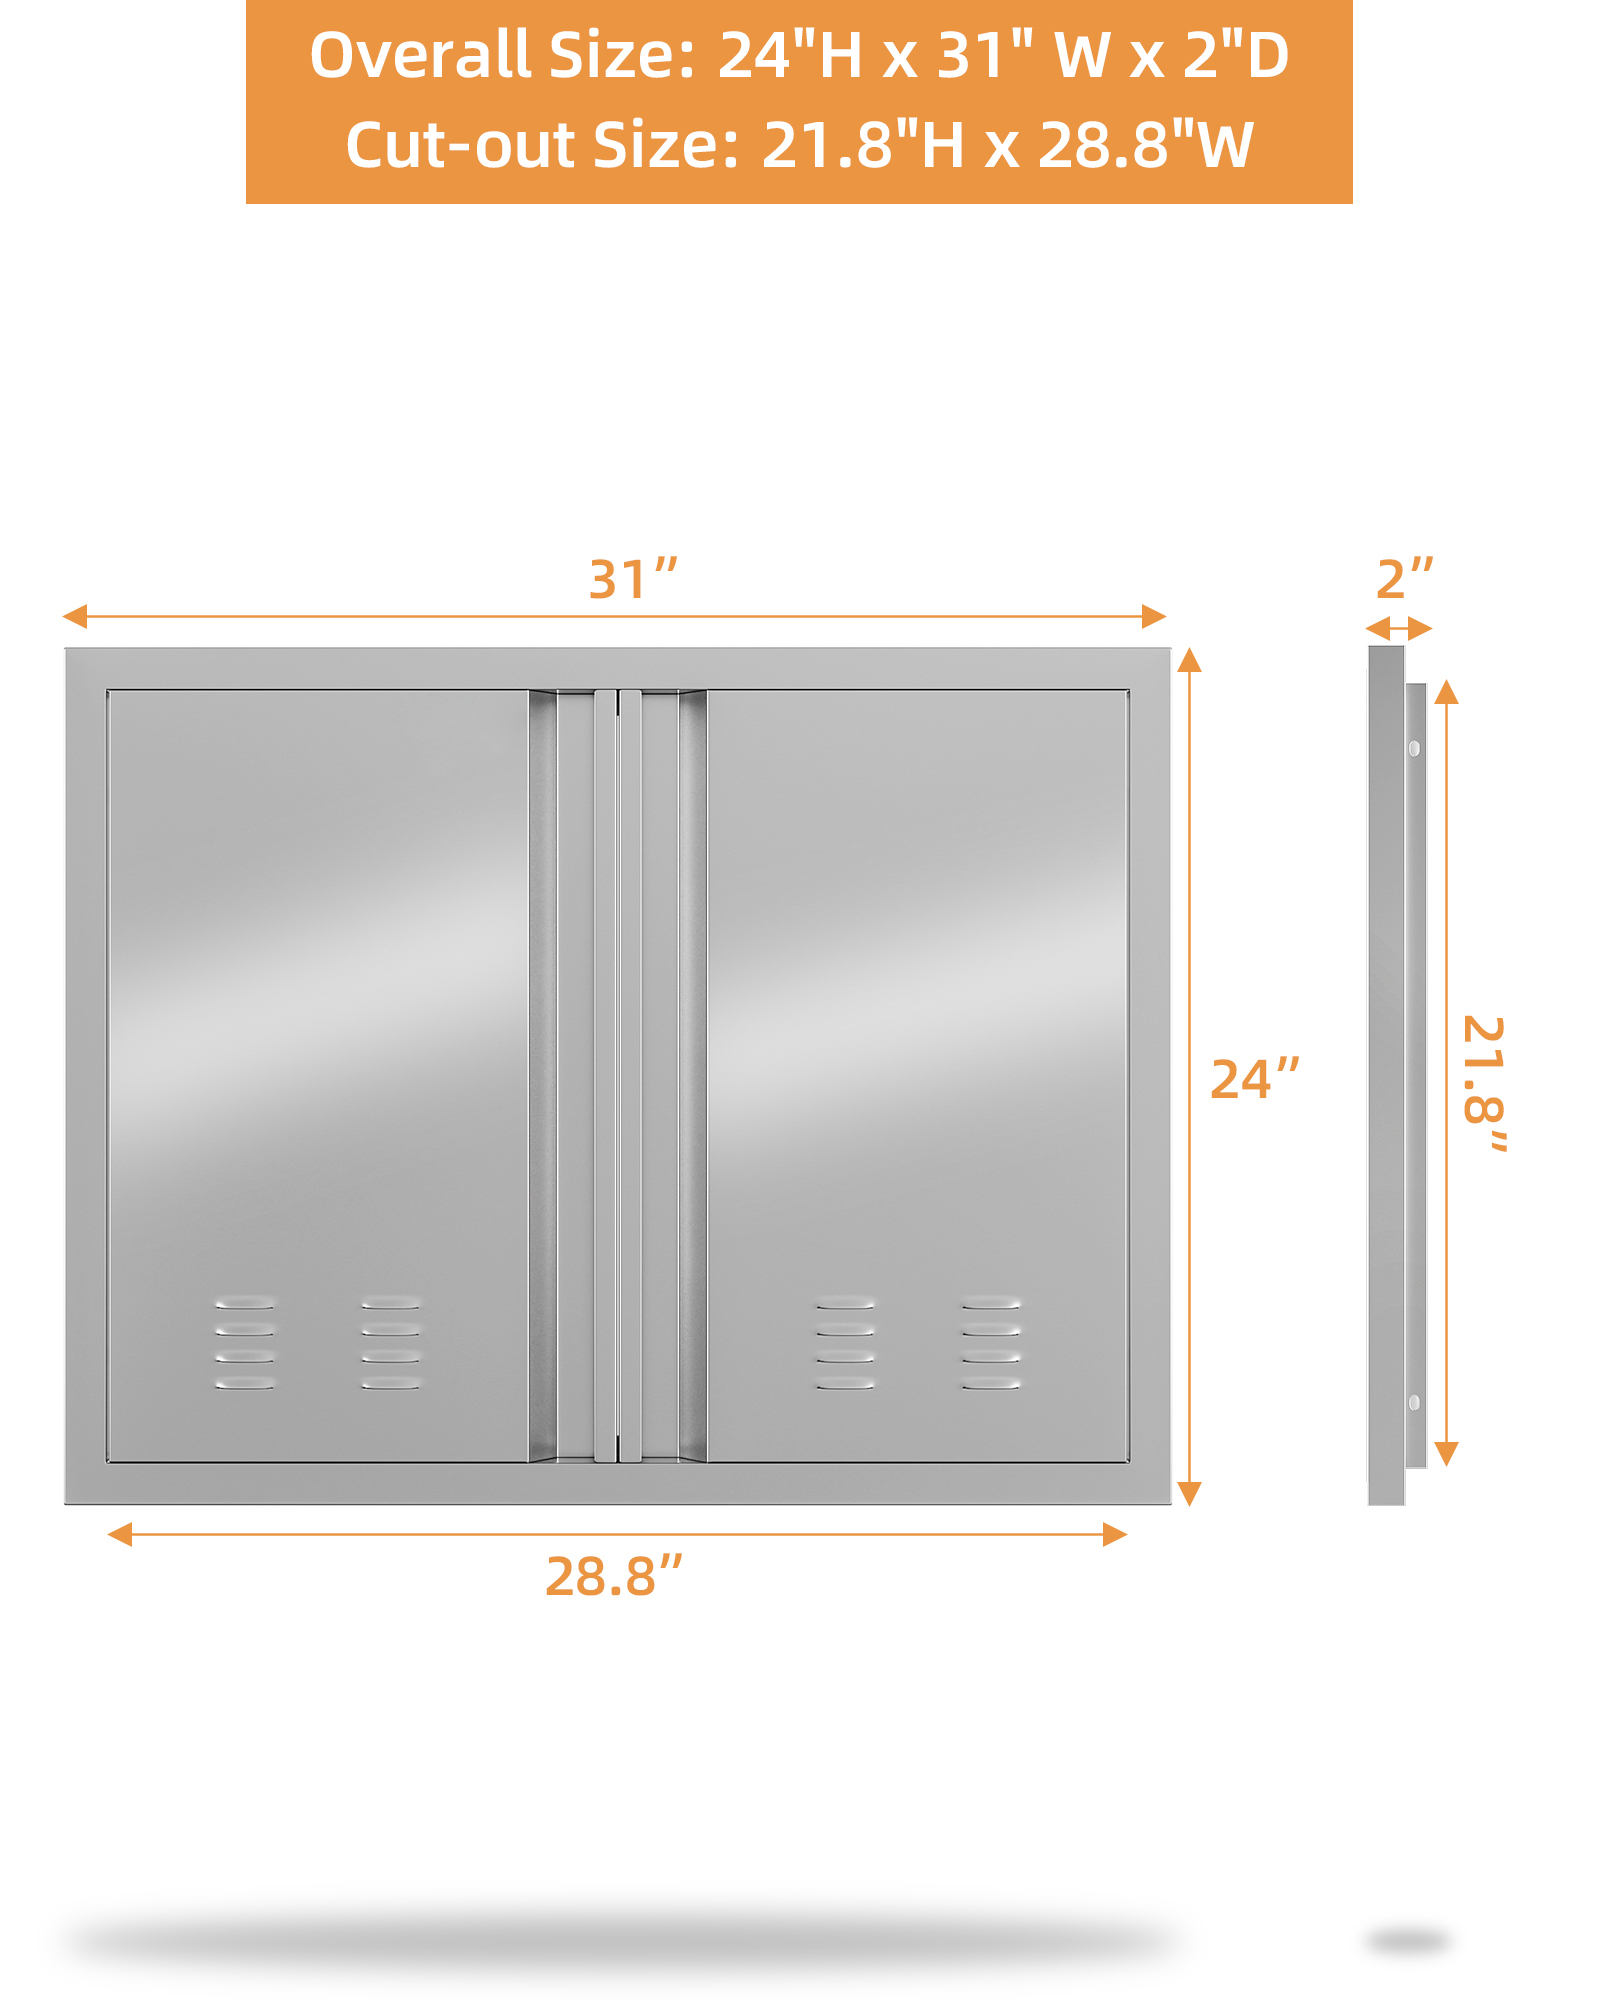 WhizMax 24" H x 31" W 304 Stainless Steel Outdoor Kitchen Access Door with Recessed Handle, Double Access Door for BBQ Island, Grilling Stati - image 5 of 7